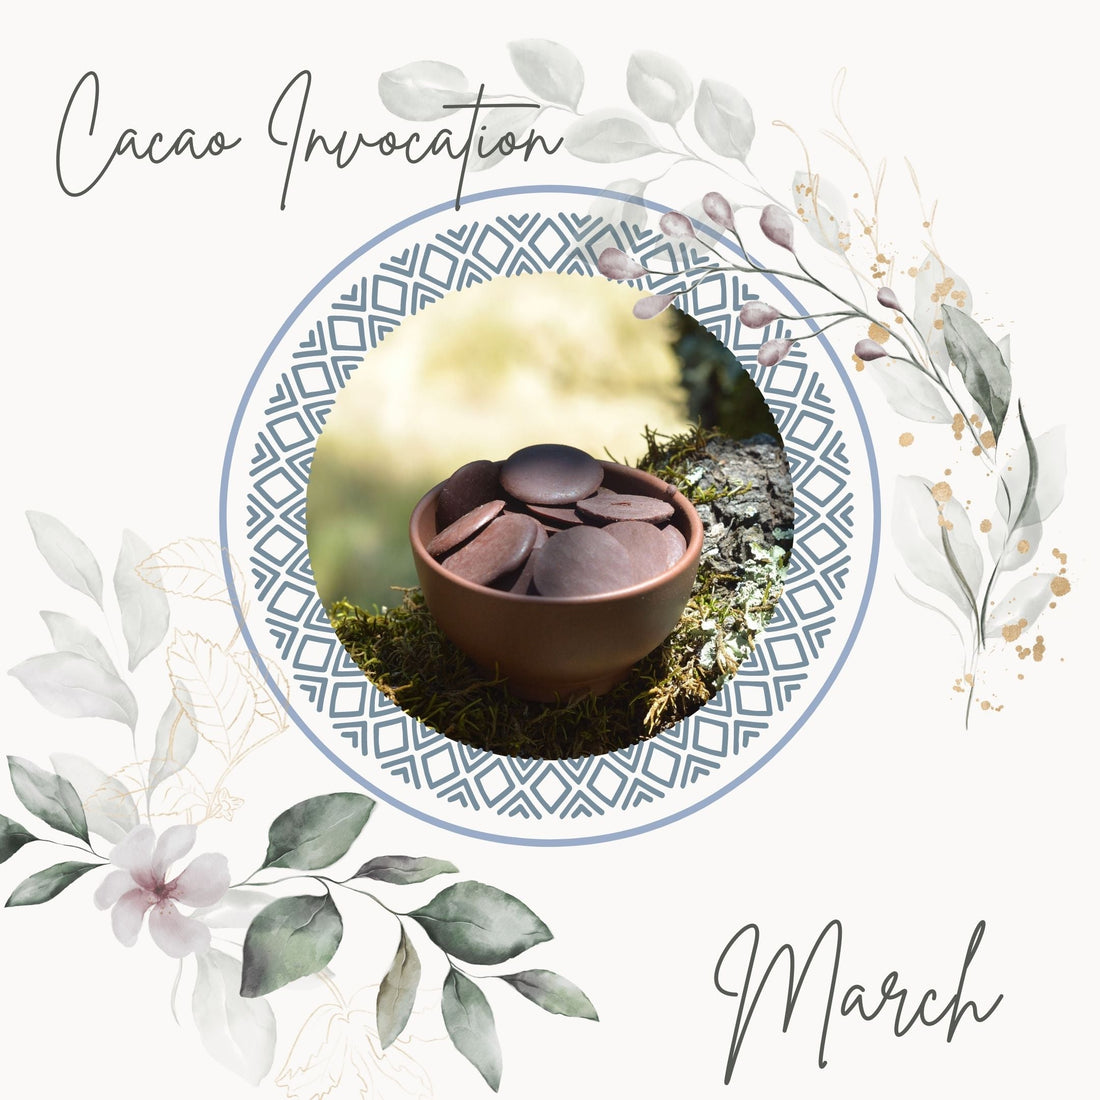 March | Cacao Invocation